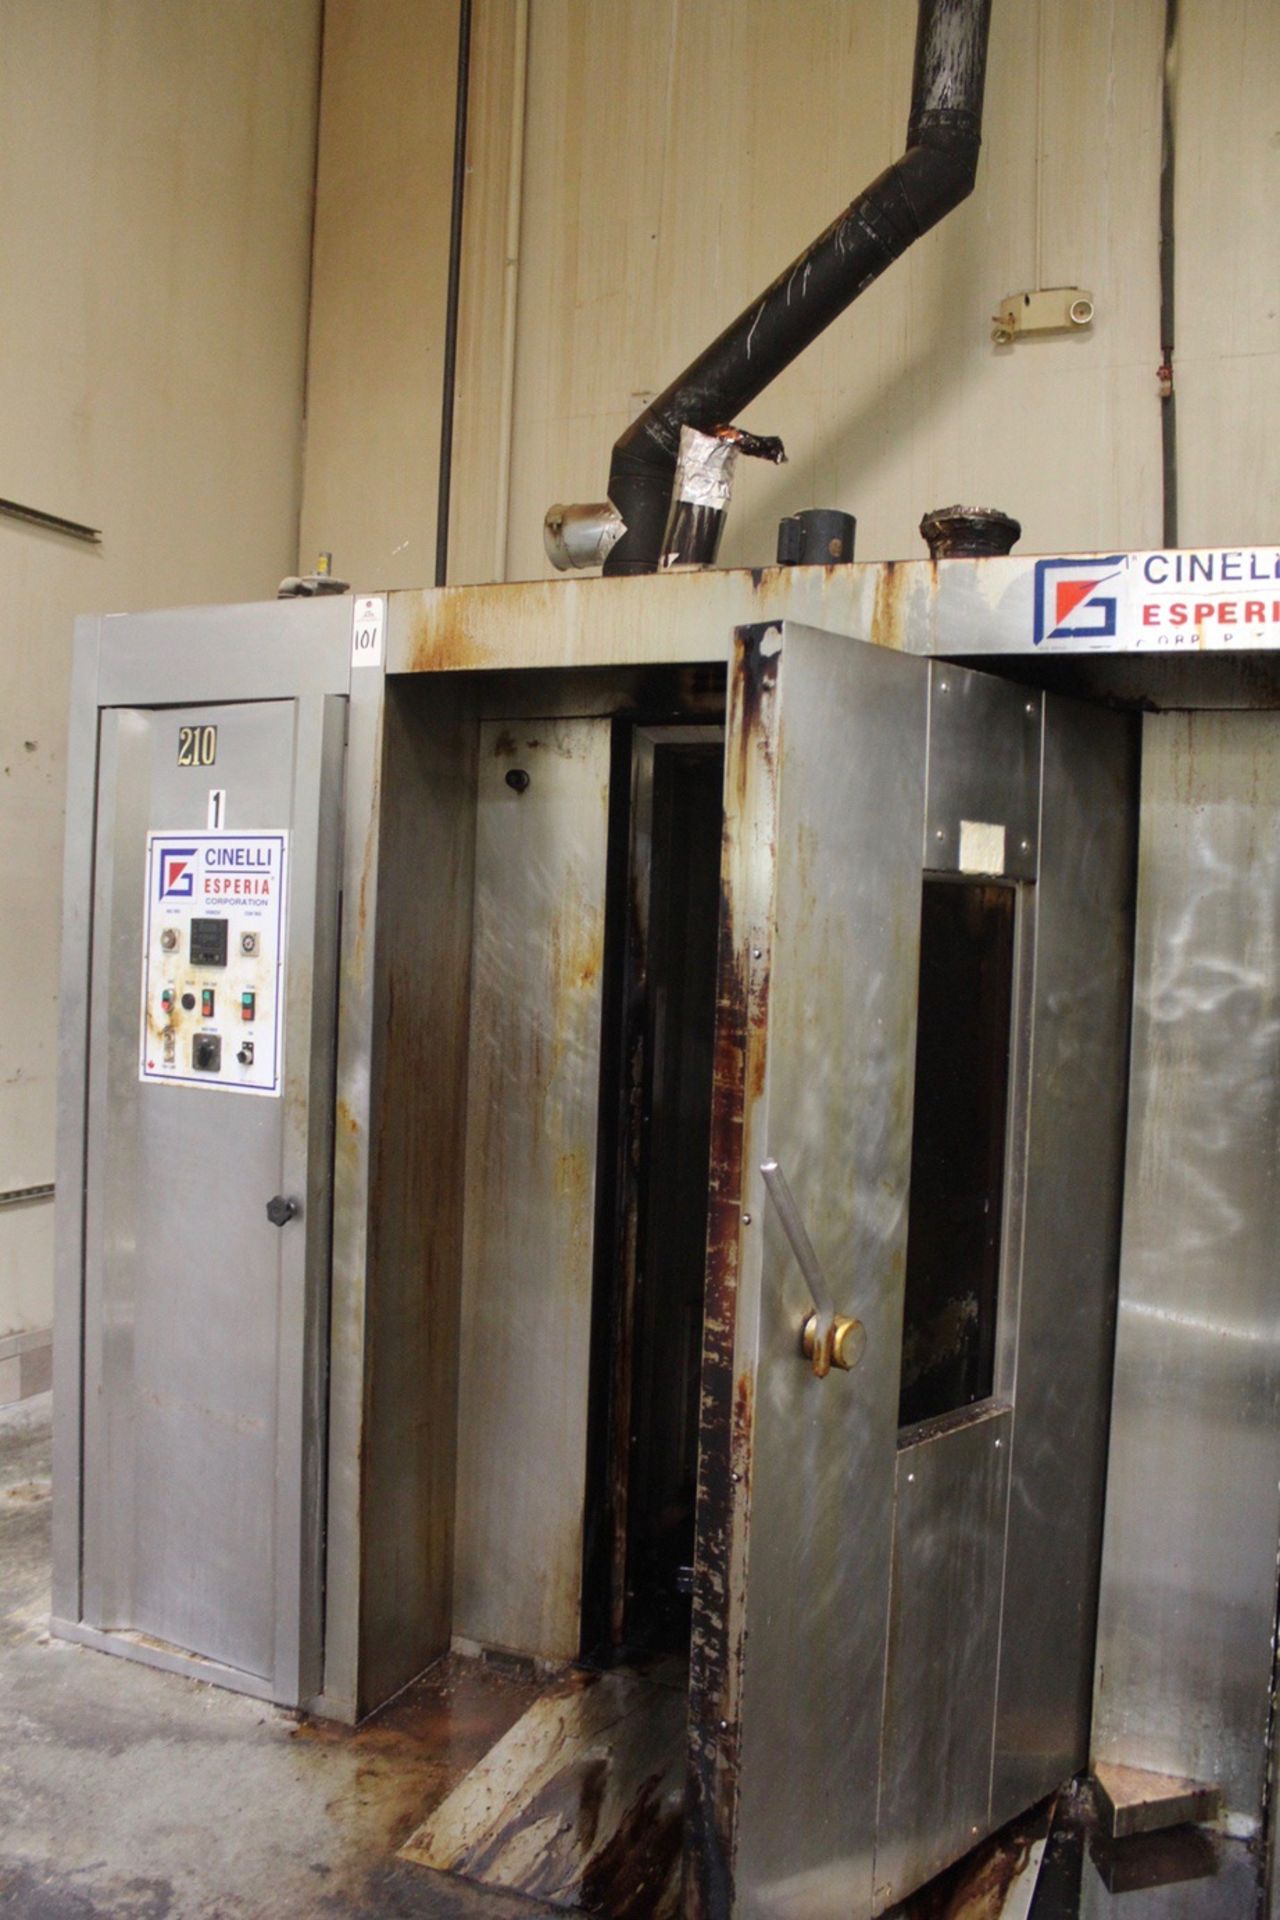 Cinelli Esperia Agas Fired Rotating Single Rack Oven, M# CG/1D, S/N 0905-219 | Rigging and Load